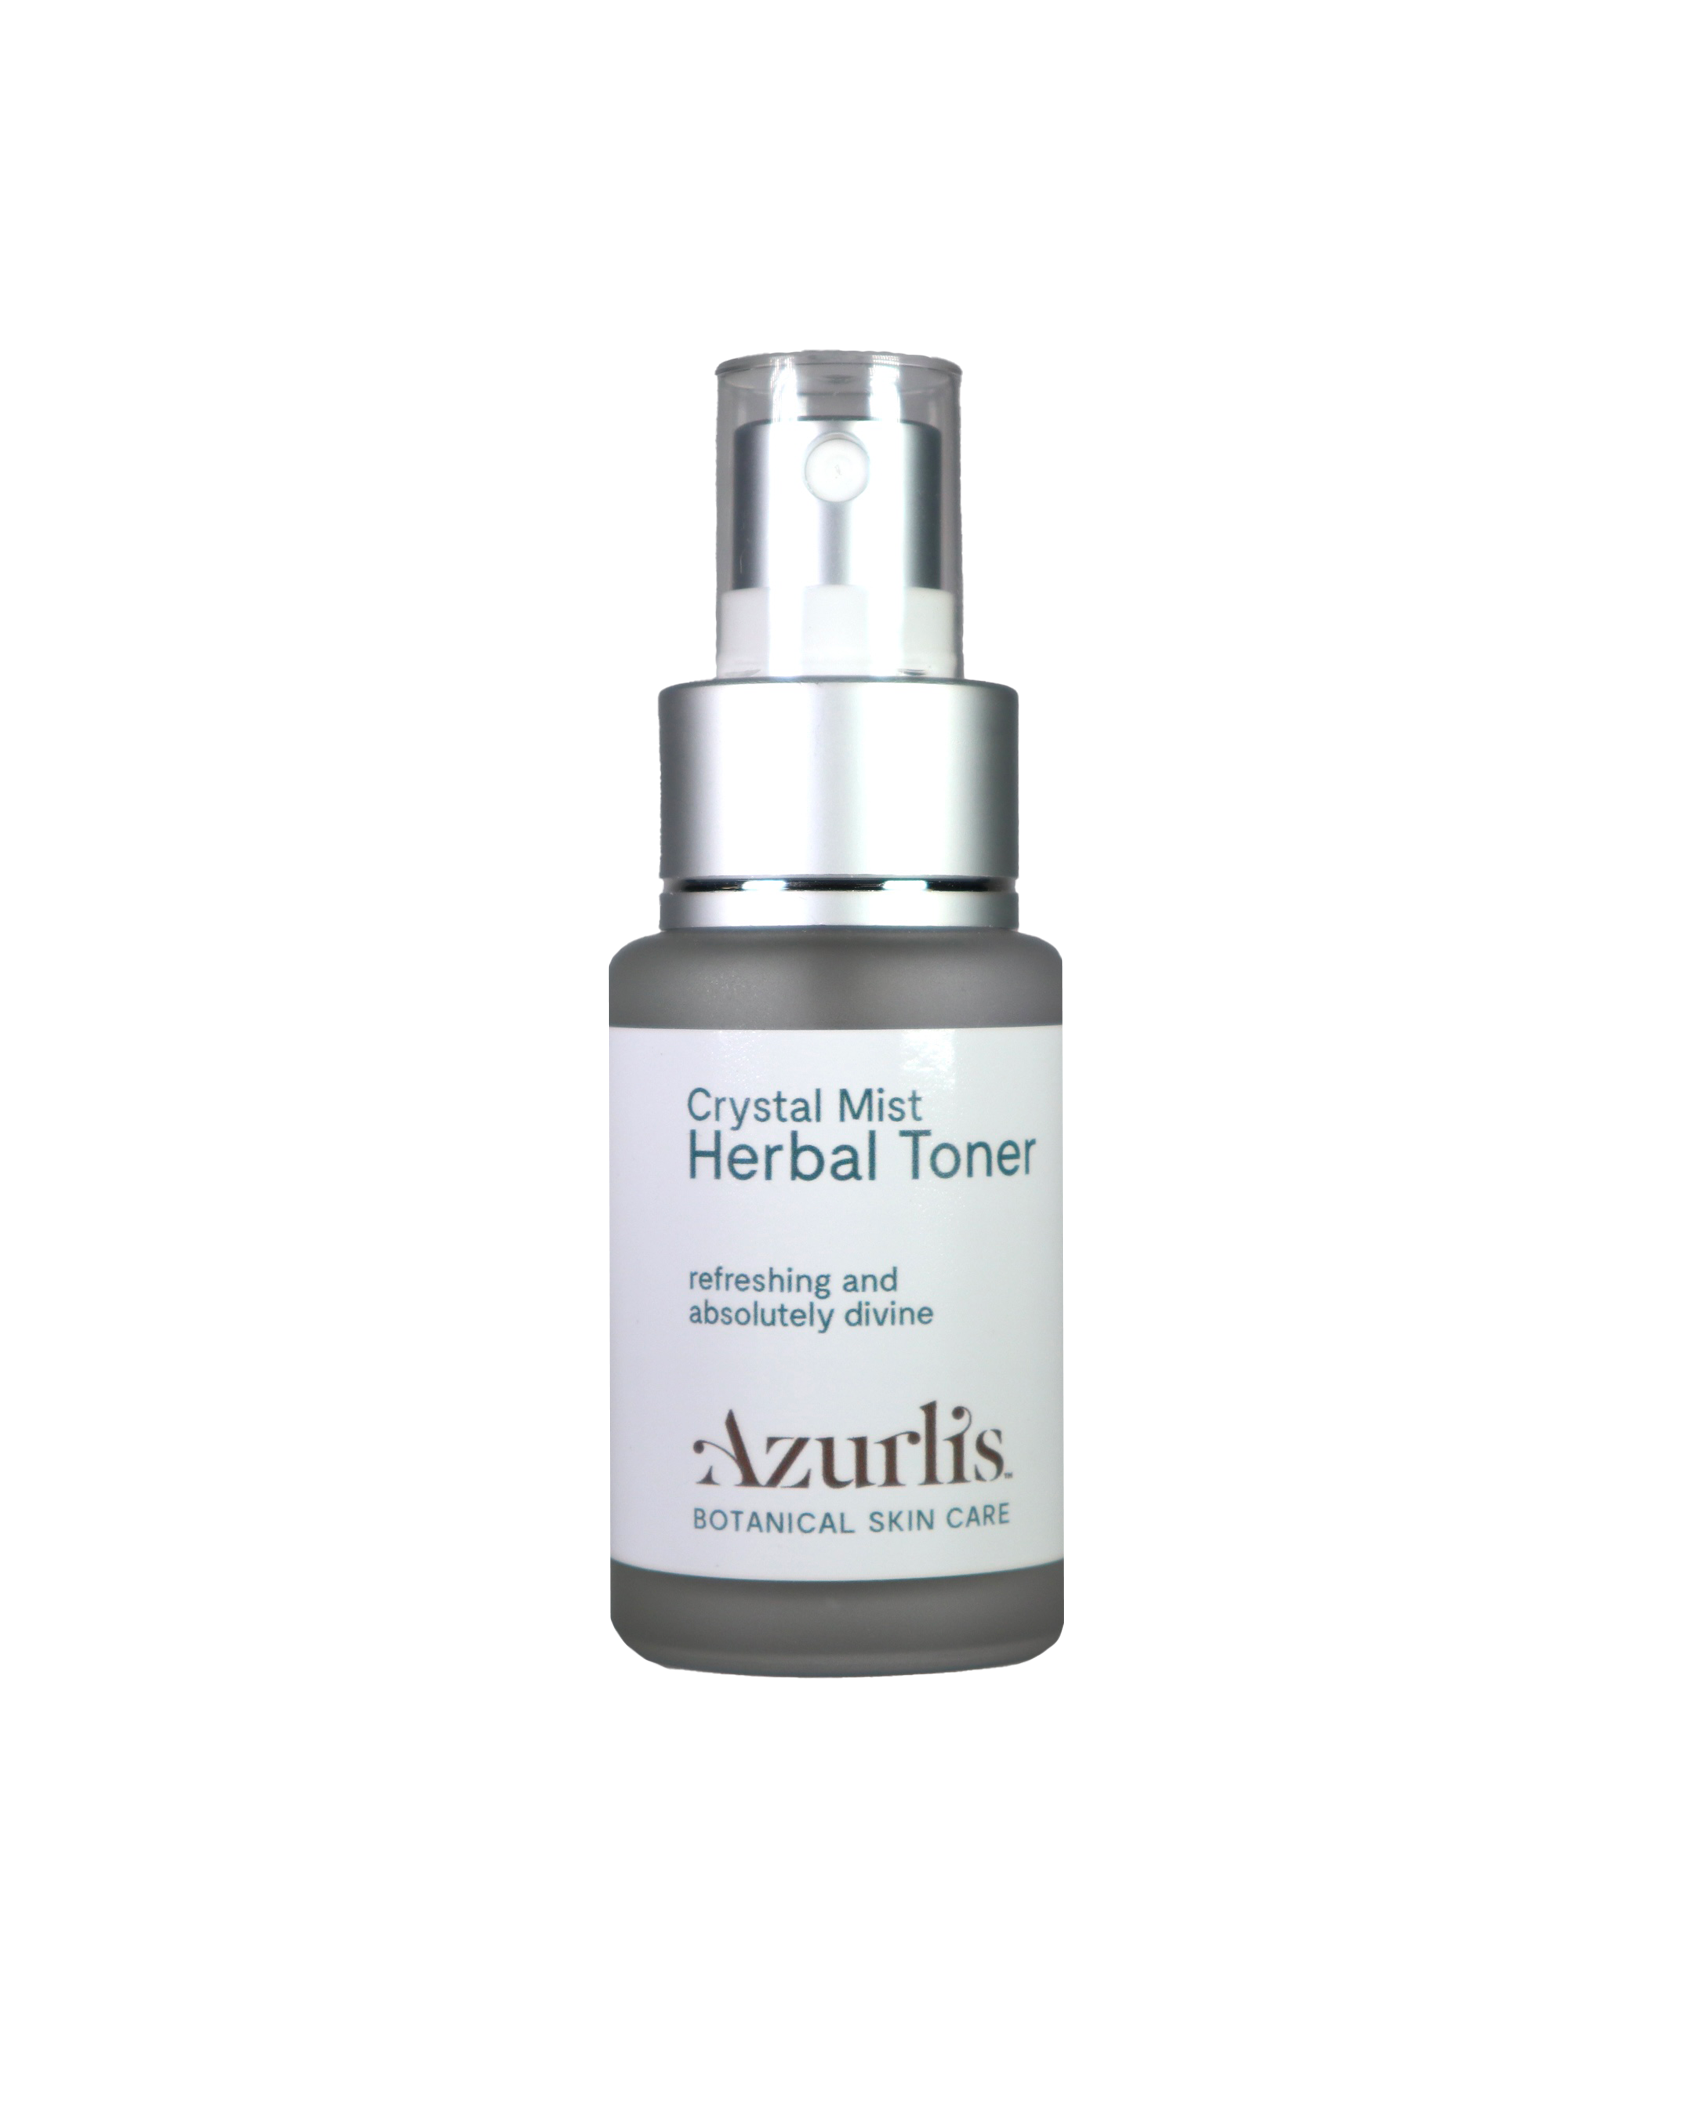 Azurlis™ Crystal Mist Herbal Toner 50ml is refreshing and absolutely divine. Great as a toner. Fantastic as a spritzer, like freshly cucumber slices on a hot Summer&#39;s day. Lovely to keep skin moist moisture under any moisturiser - 100% alcohol-free.